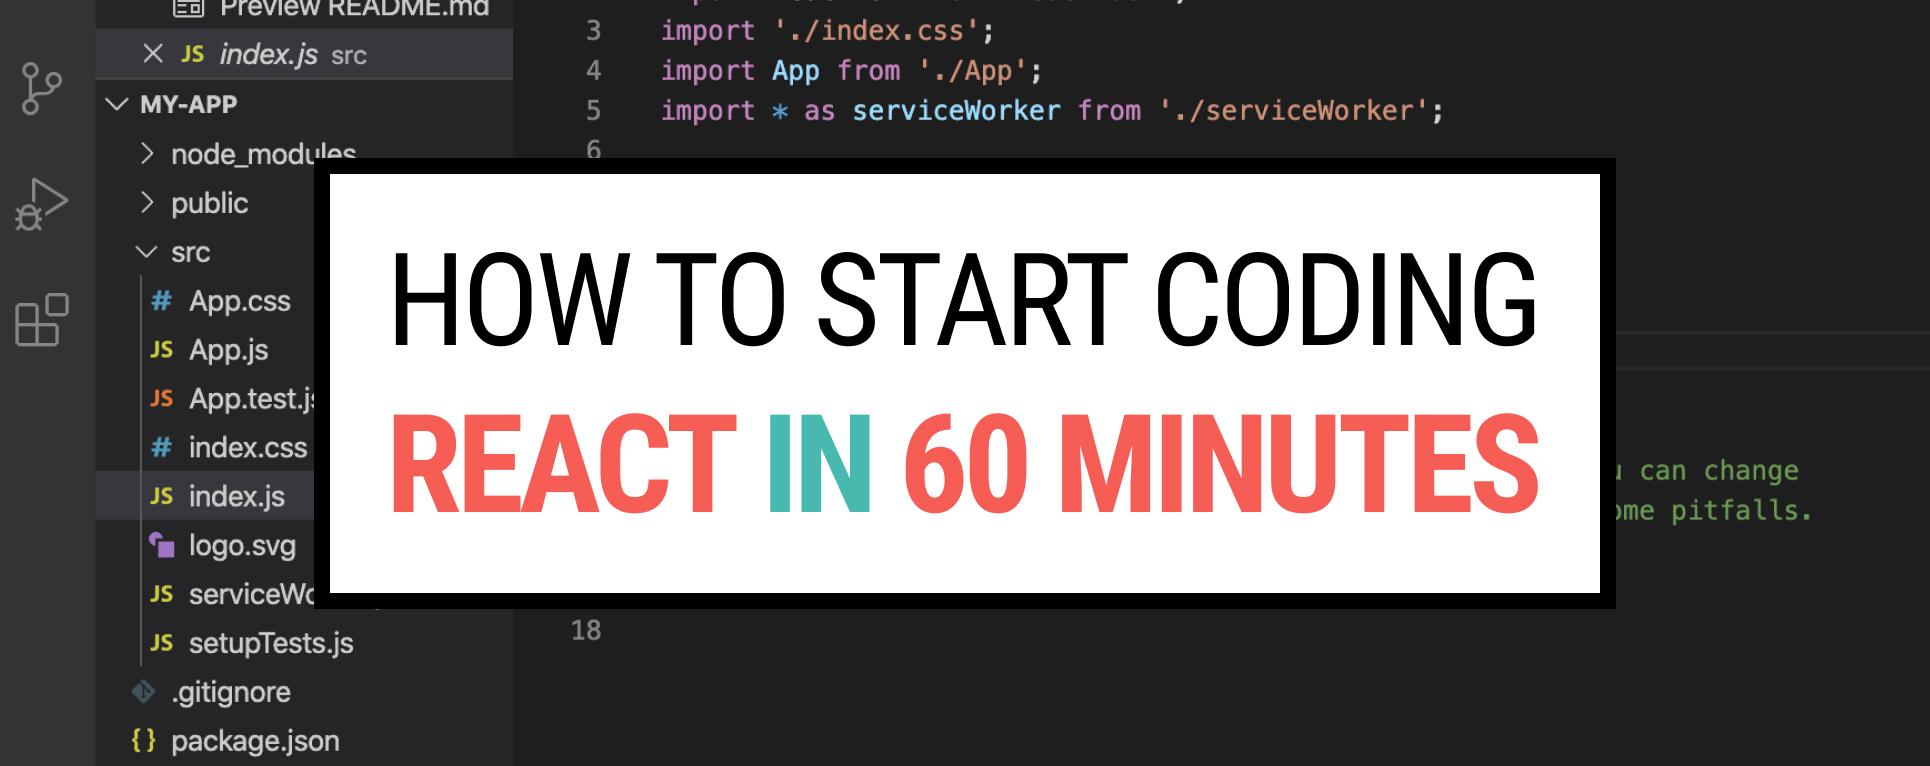 How to start coding React in 60 minutes